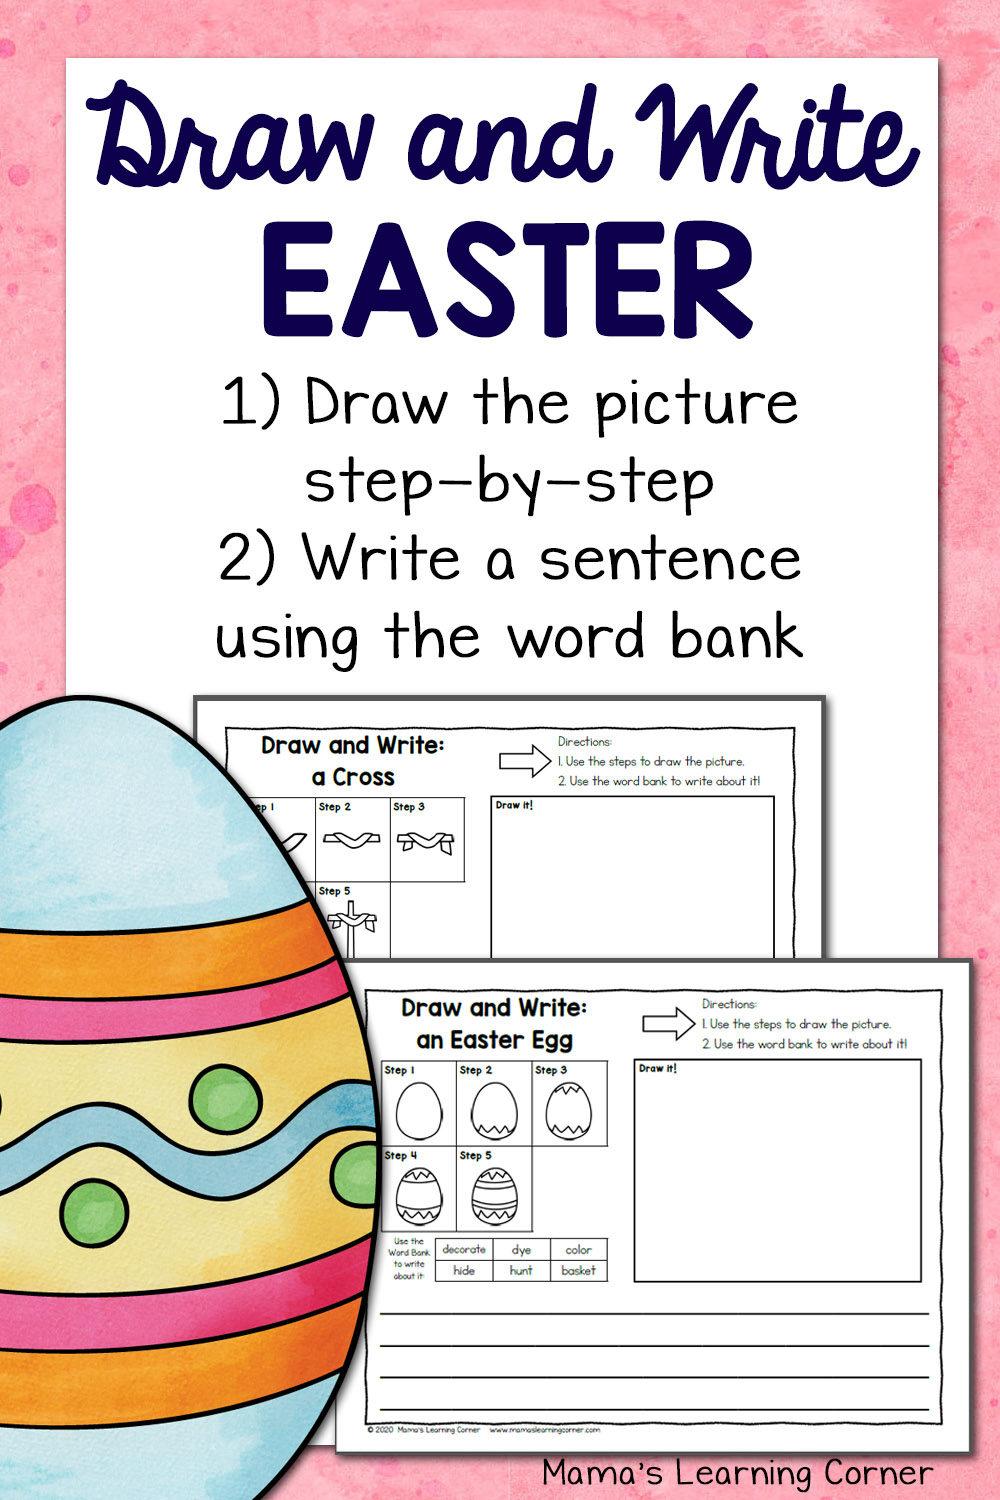 Easter Directed Draw and Write Worksheets